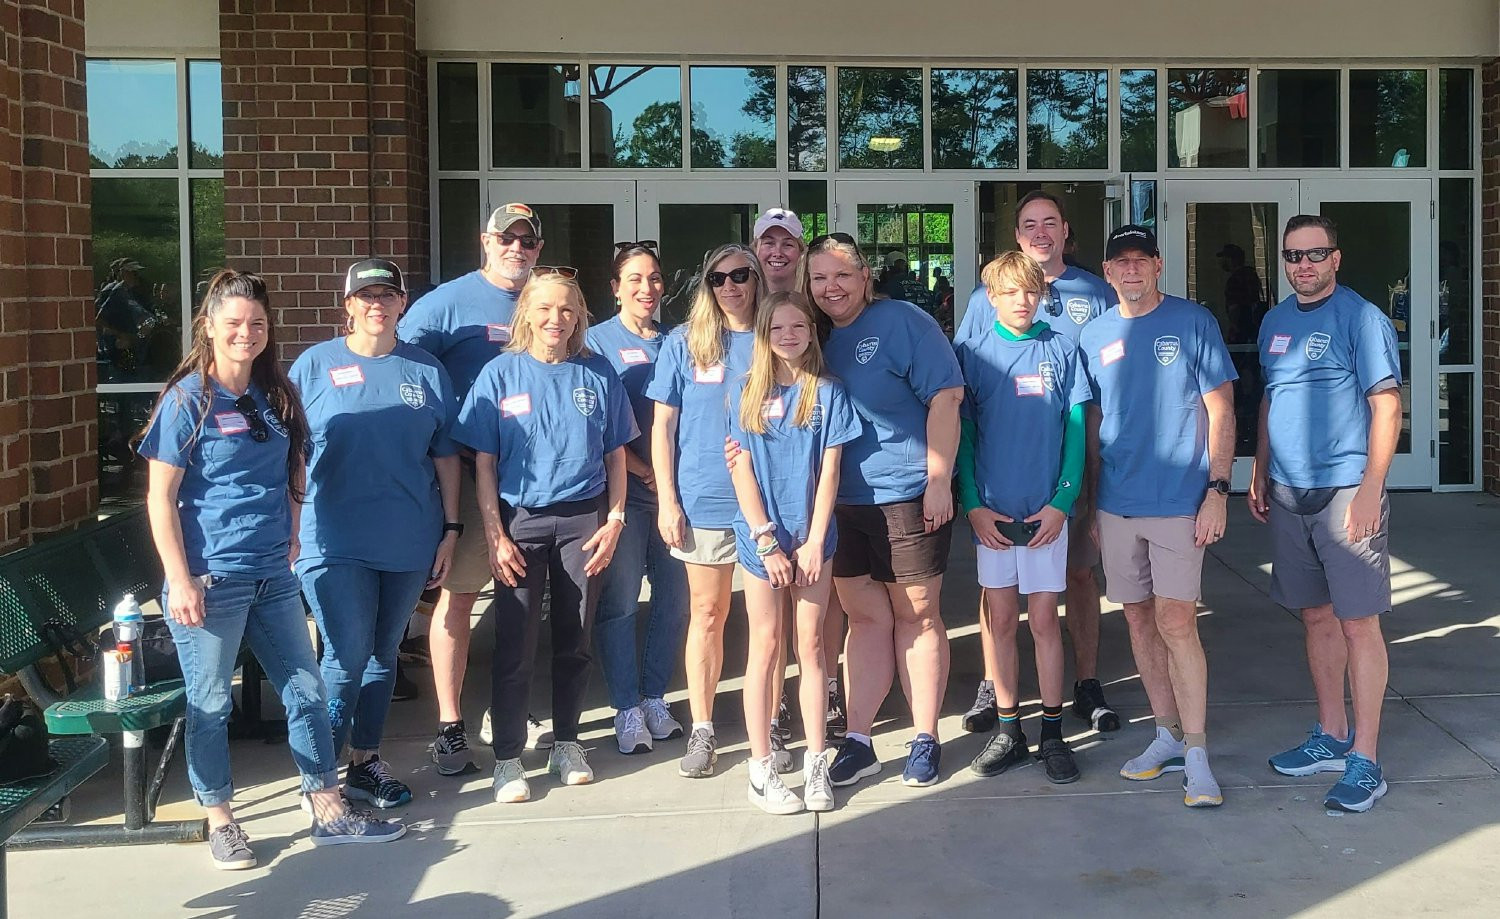 Charlotte Division team members volunteering with the Special Olympics